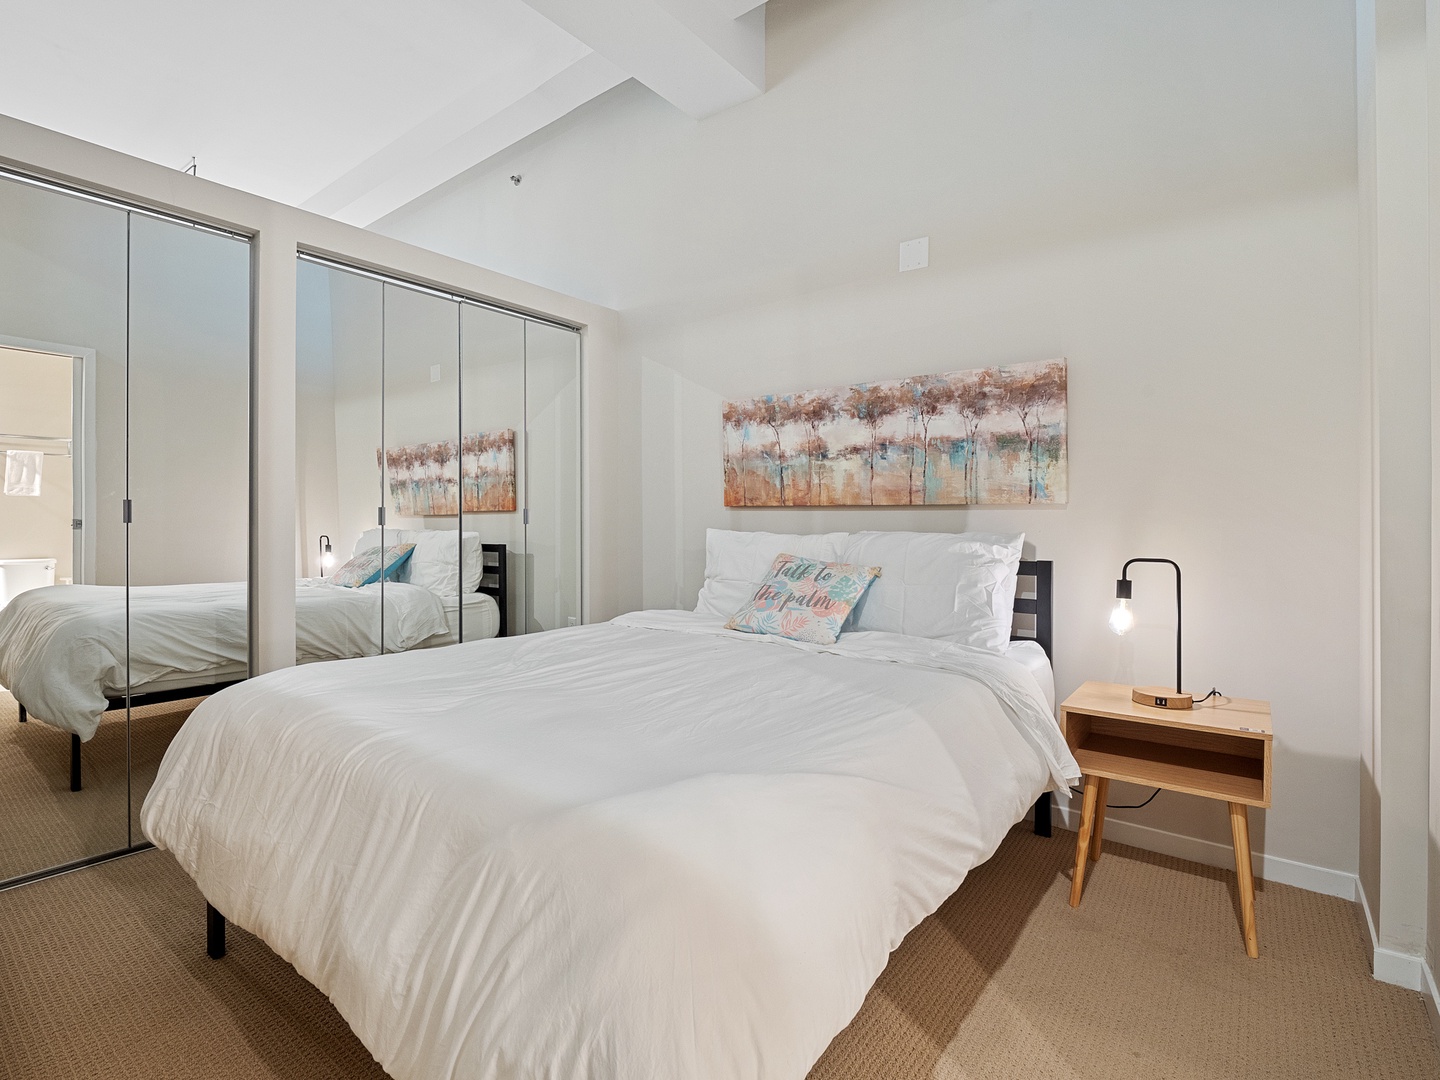 Simplicity meets sophistication in this minimalist bedroom